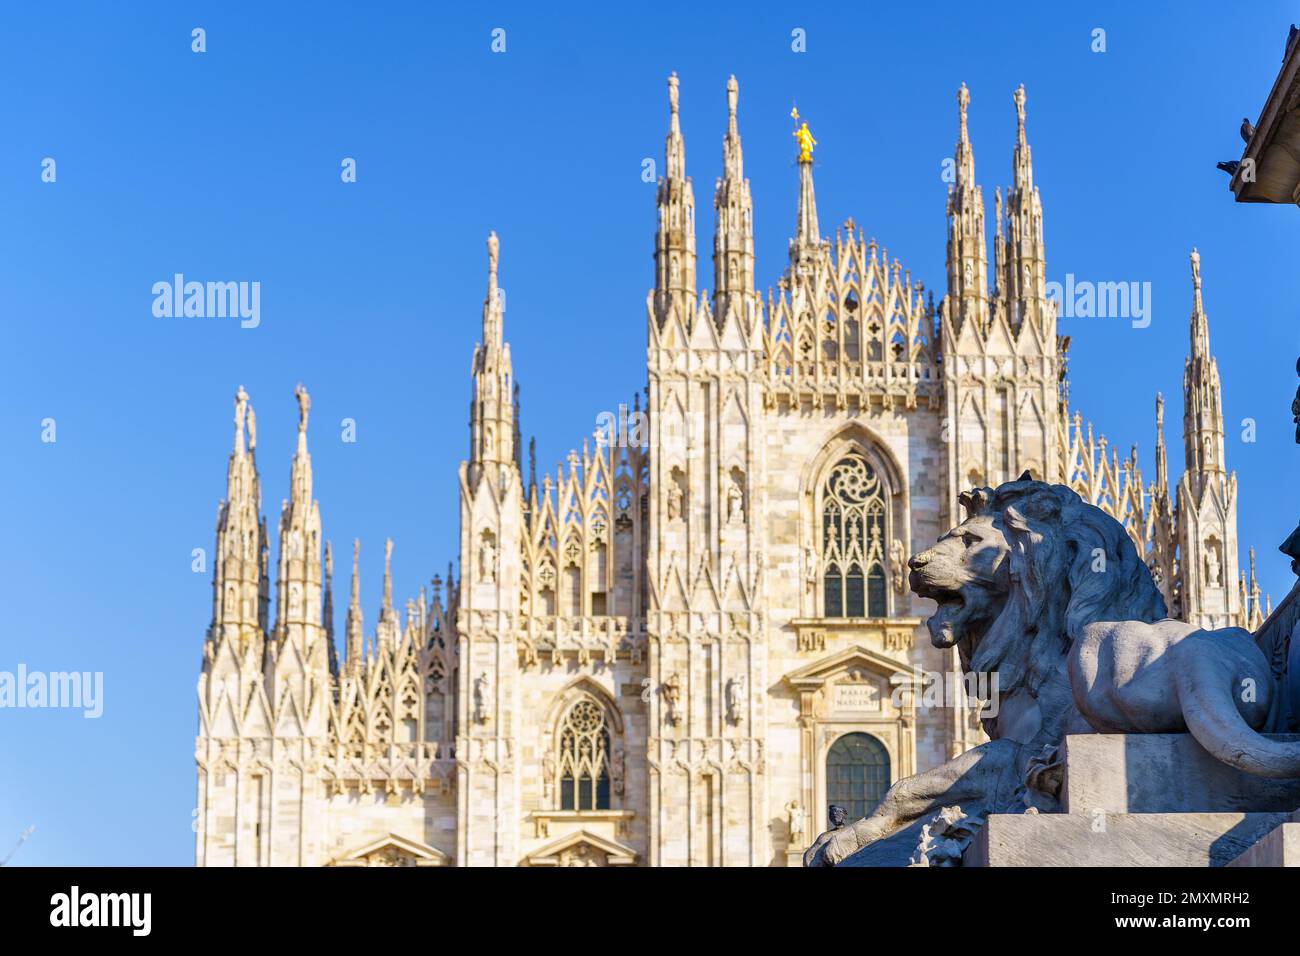 View of the Statue for Vittorio Emanuele II (dated 1879), and the Cathedral (Duomo) in the background, in Milan, Lombardy, Northern Italy Stock Photo